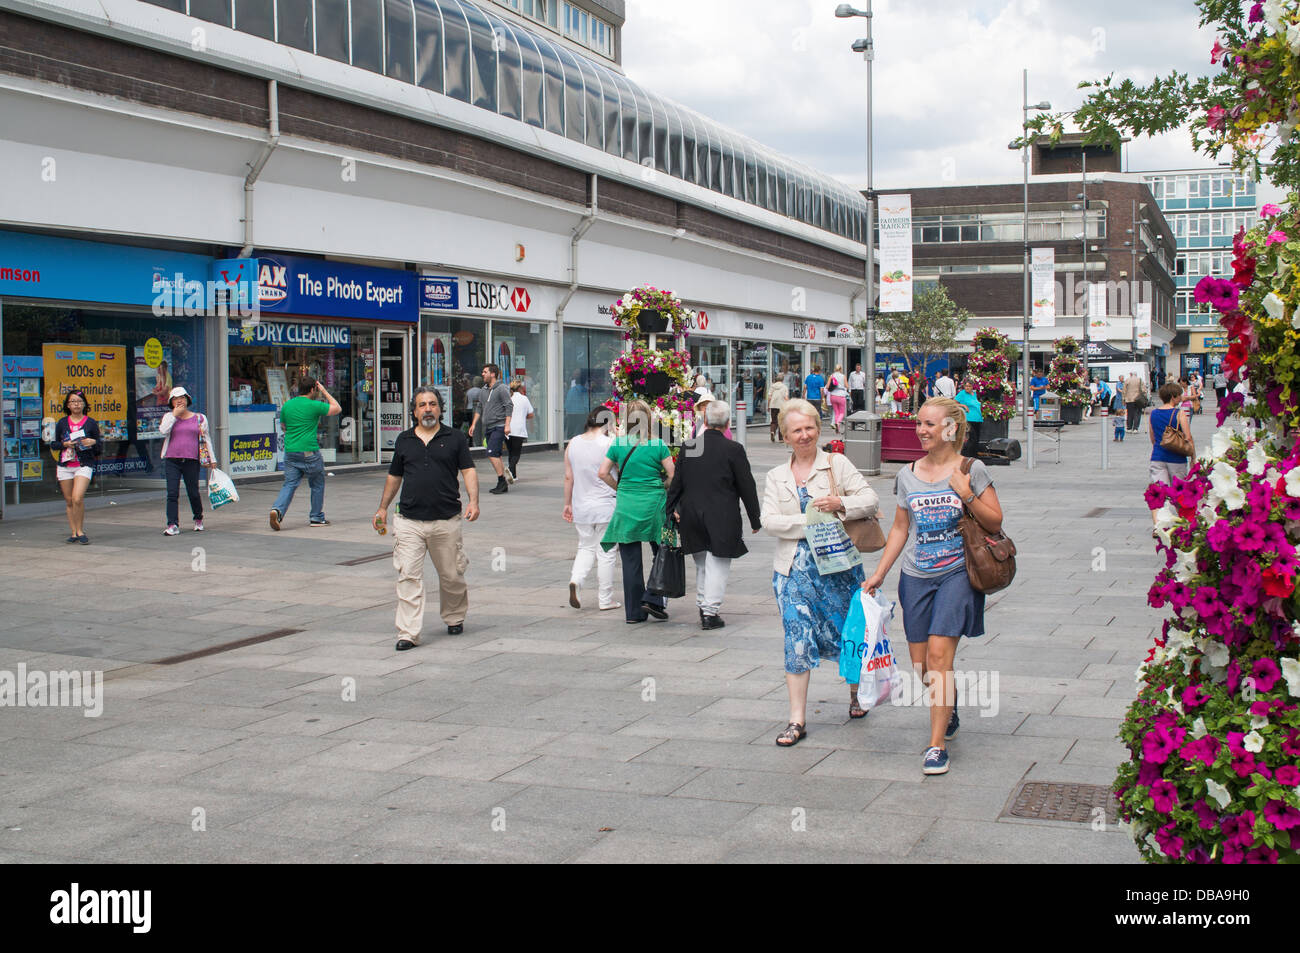 People walking through the pedestrianised Market Square in Sunderland, north east England UK Stock Photo